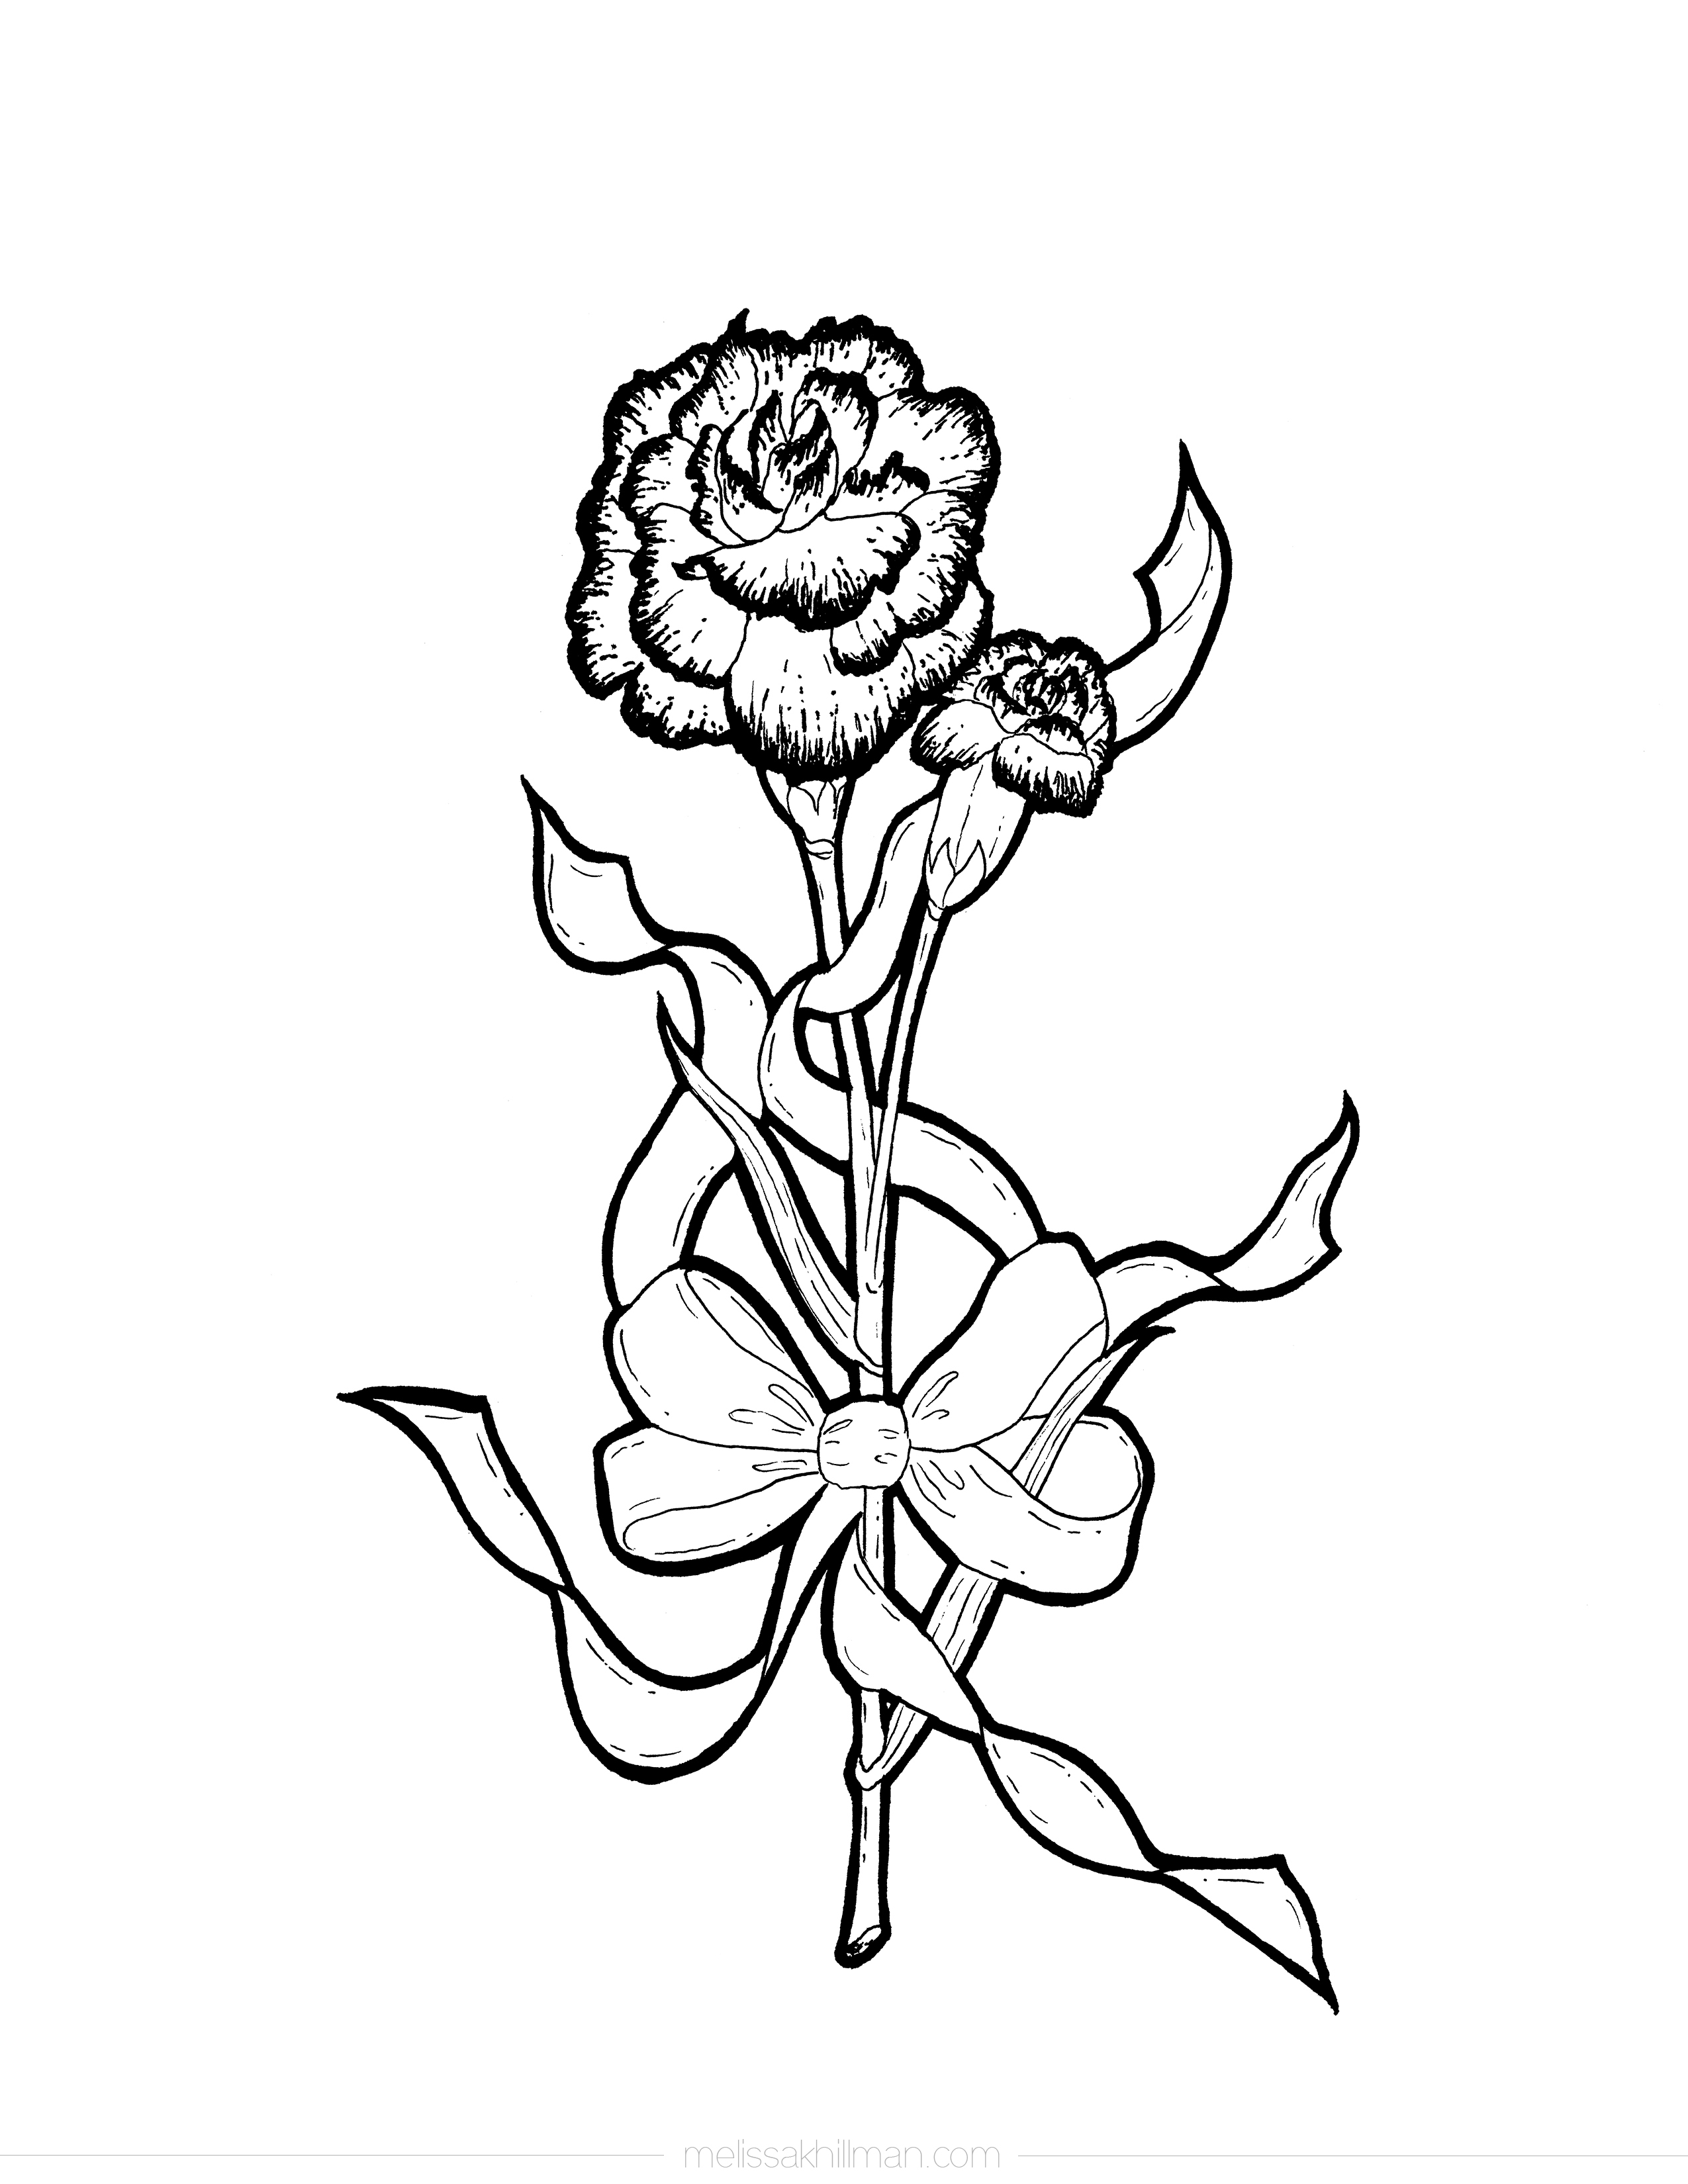 “Carnation” Coloring Page